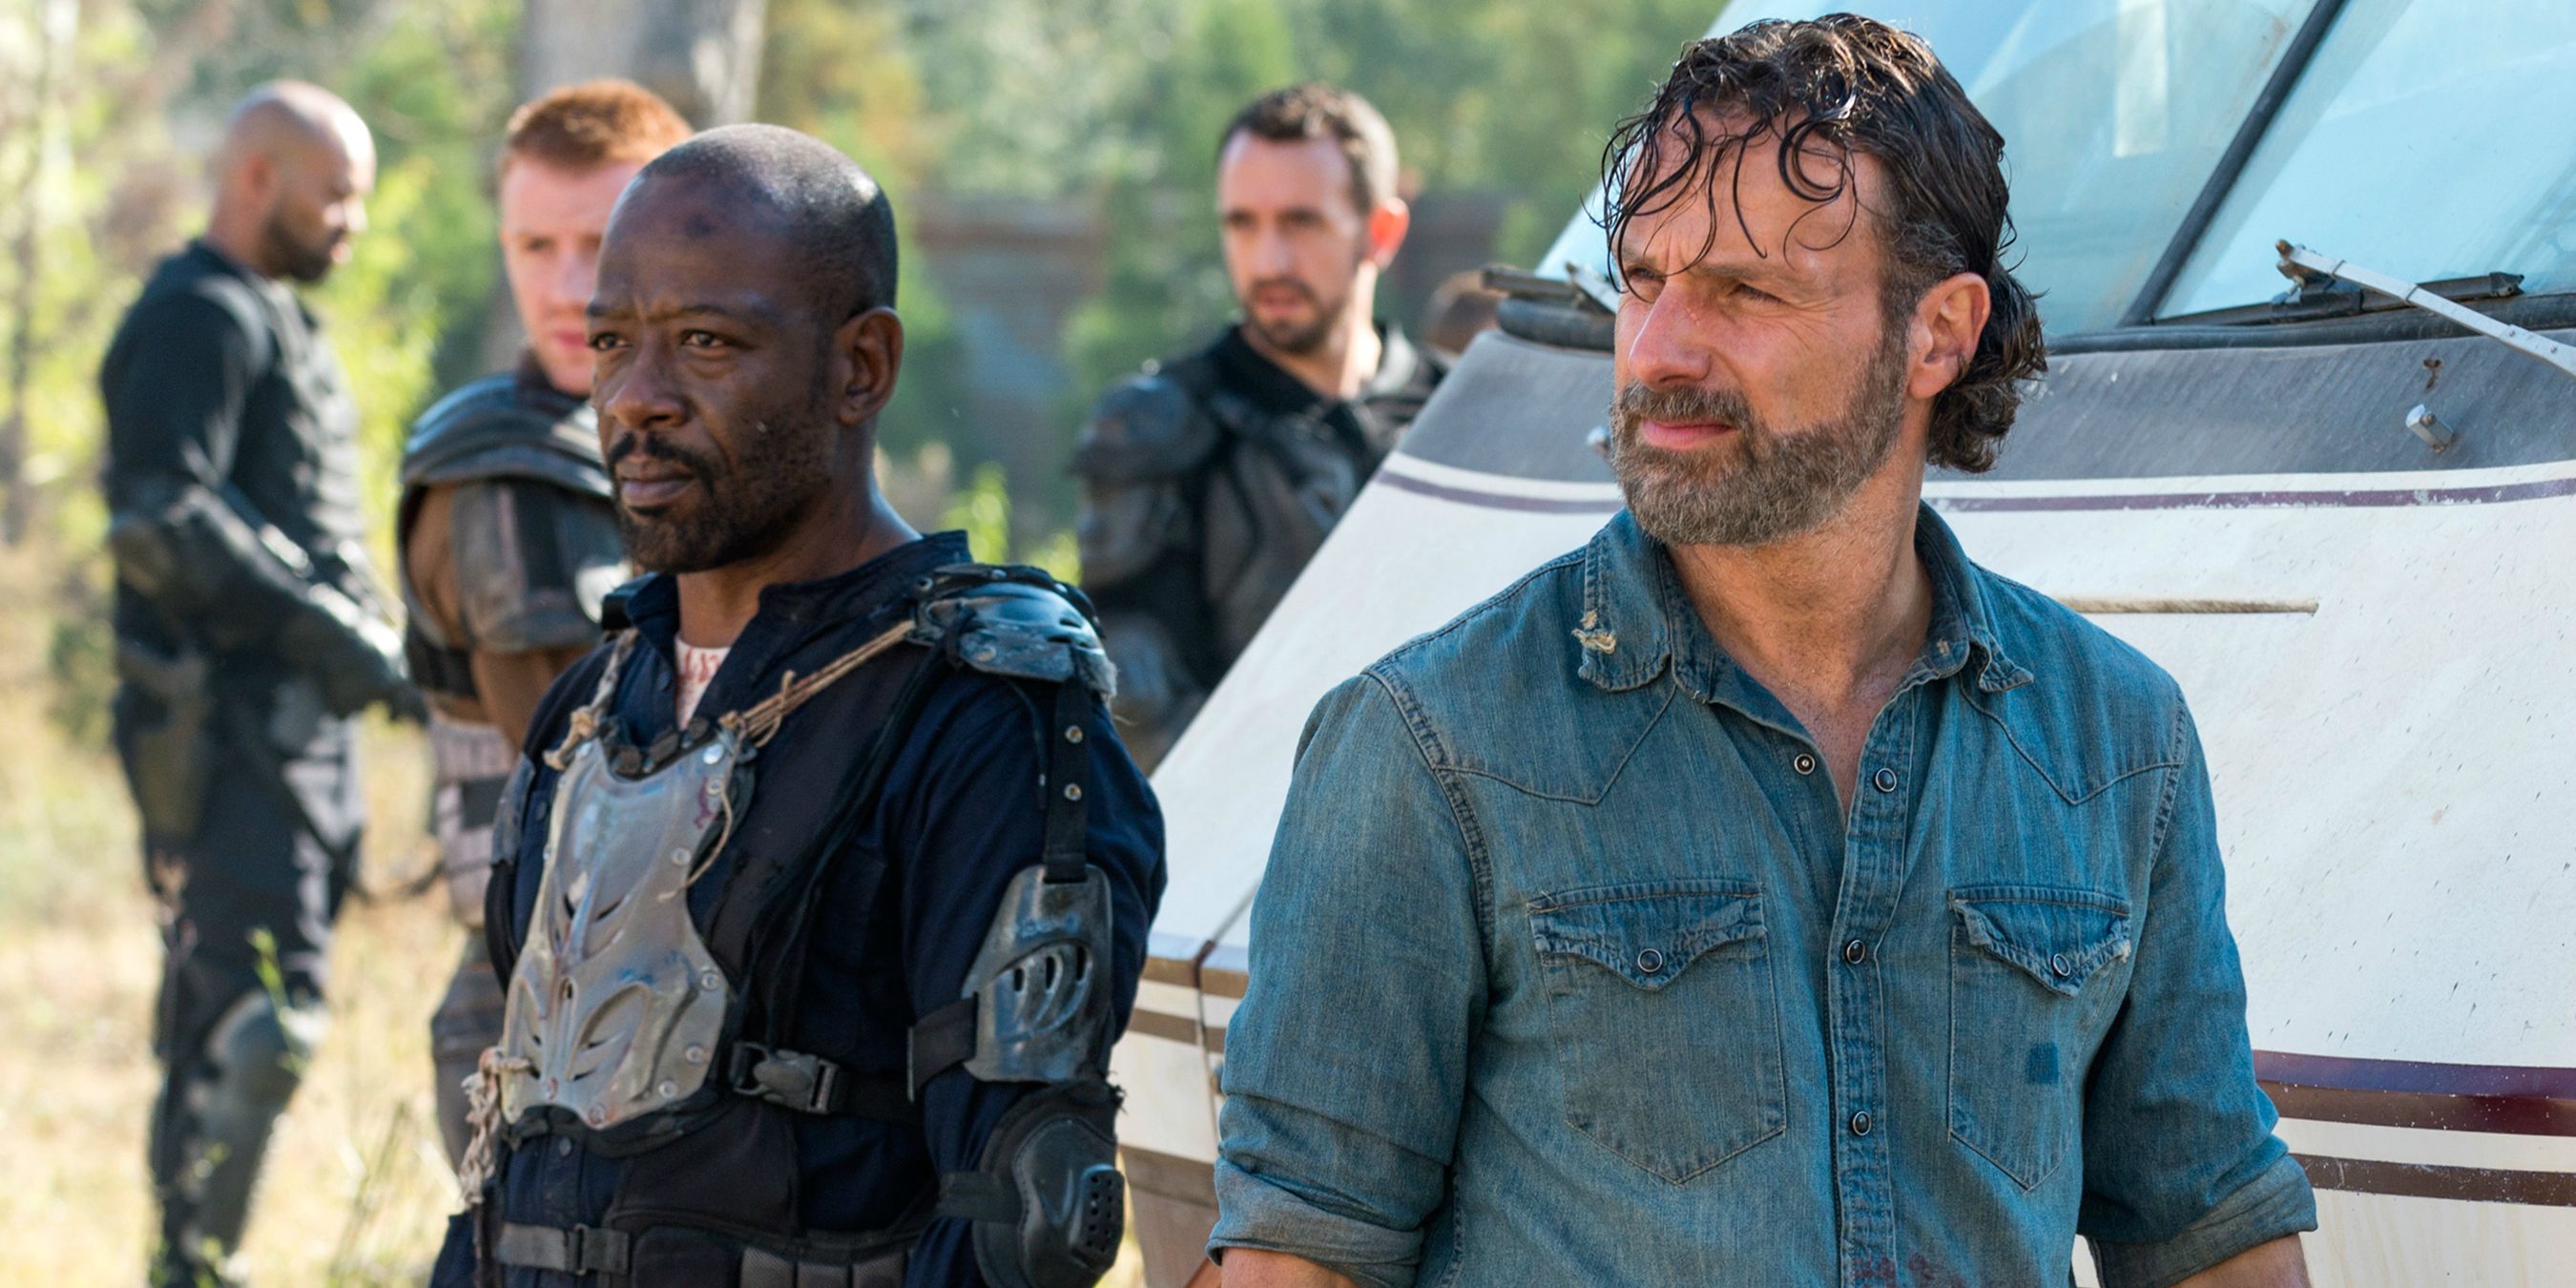 Andrew Lincoln as Rick Grimes and Lennie James as Morgan Jones in The Walking Dead